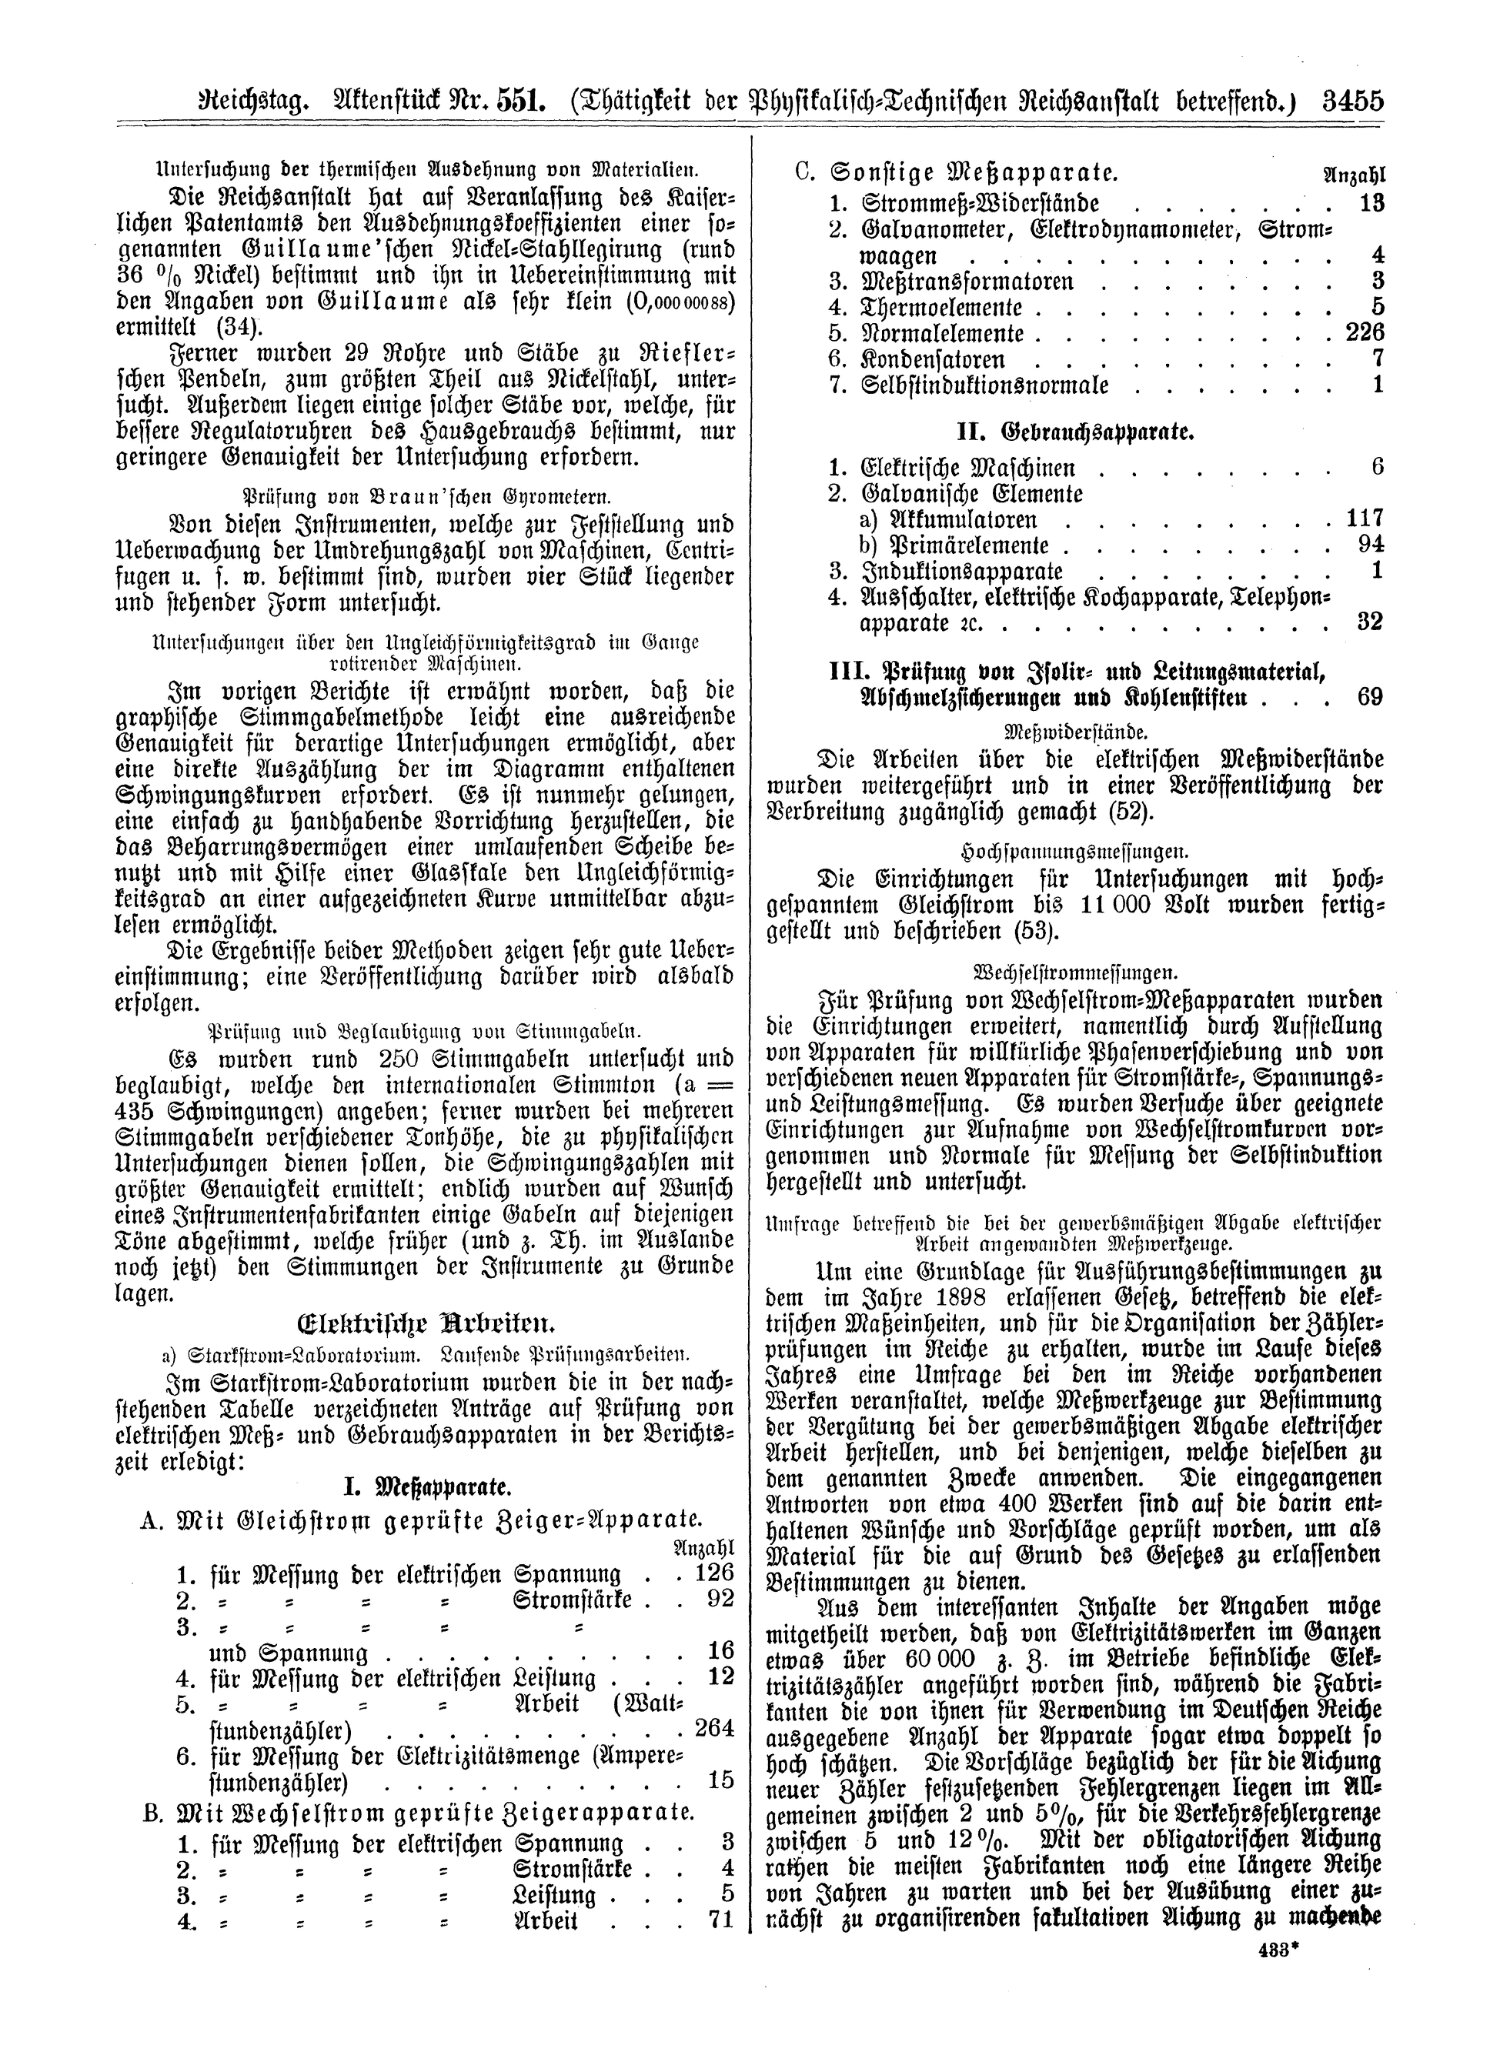 Scan of page 3455